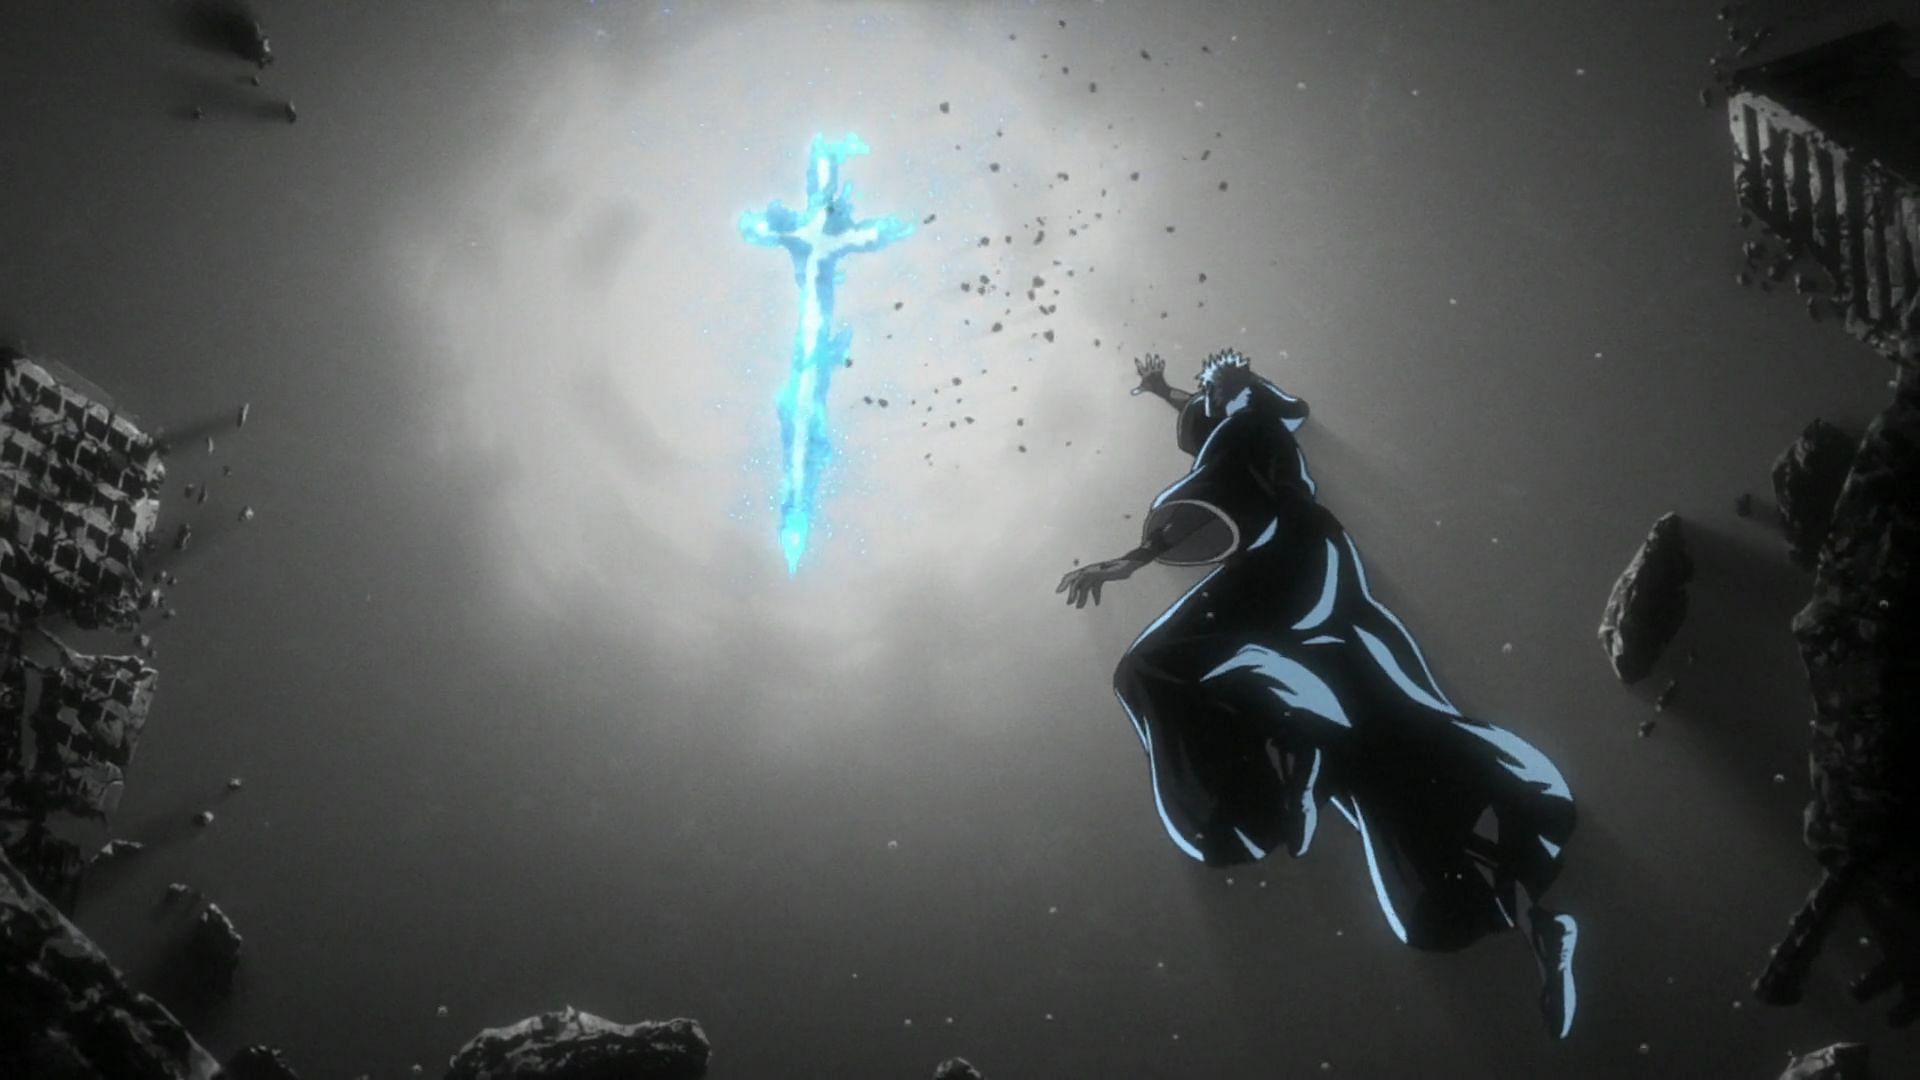 Bleach TYBW Part 2 opening foreshadows a pointless duel - Dexerto